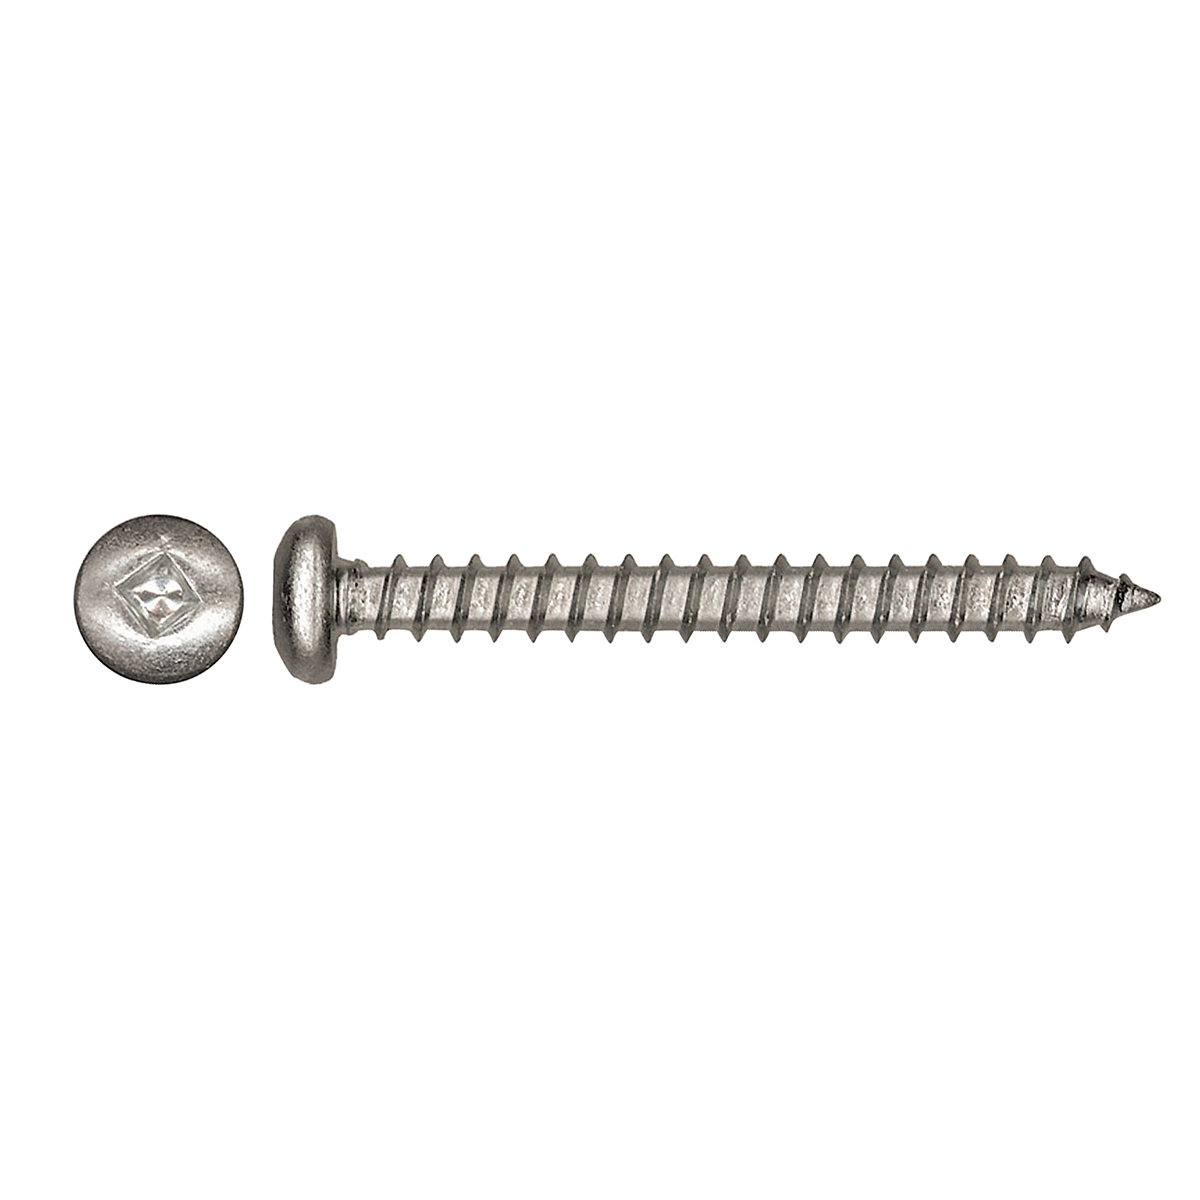 SLOTTED ROUND HEAD WOOD SCREWS A2 STAINLESS STEEL DOME SLOT PAN 3mm 4mm 5mm 6mm 